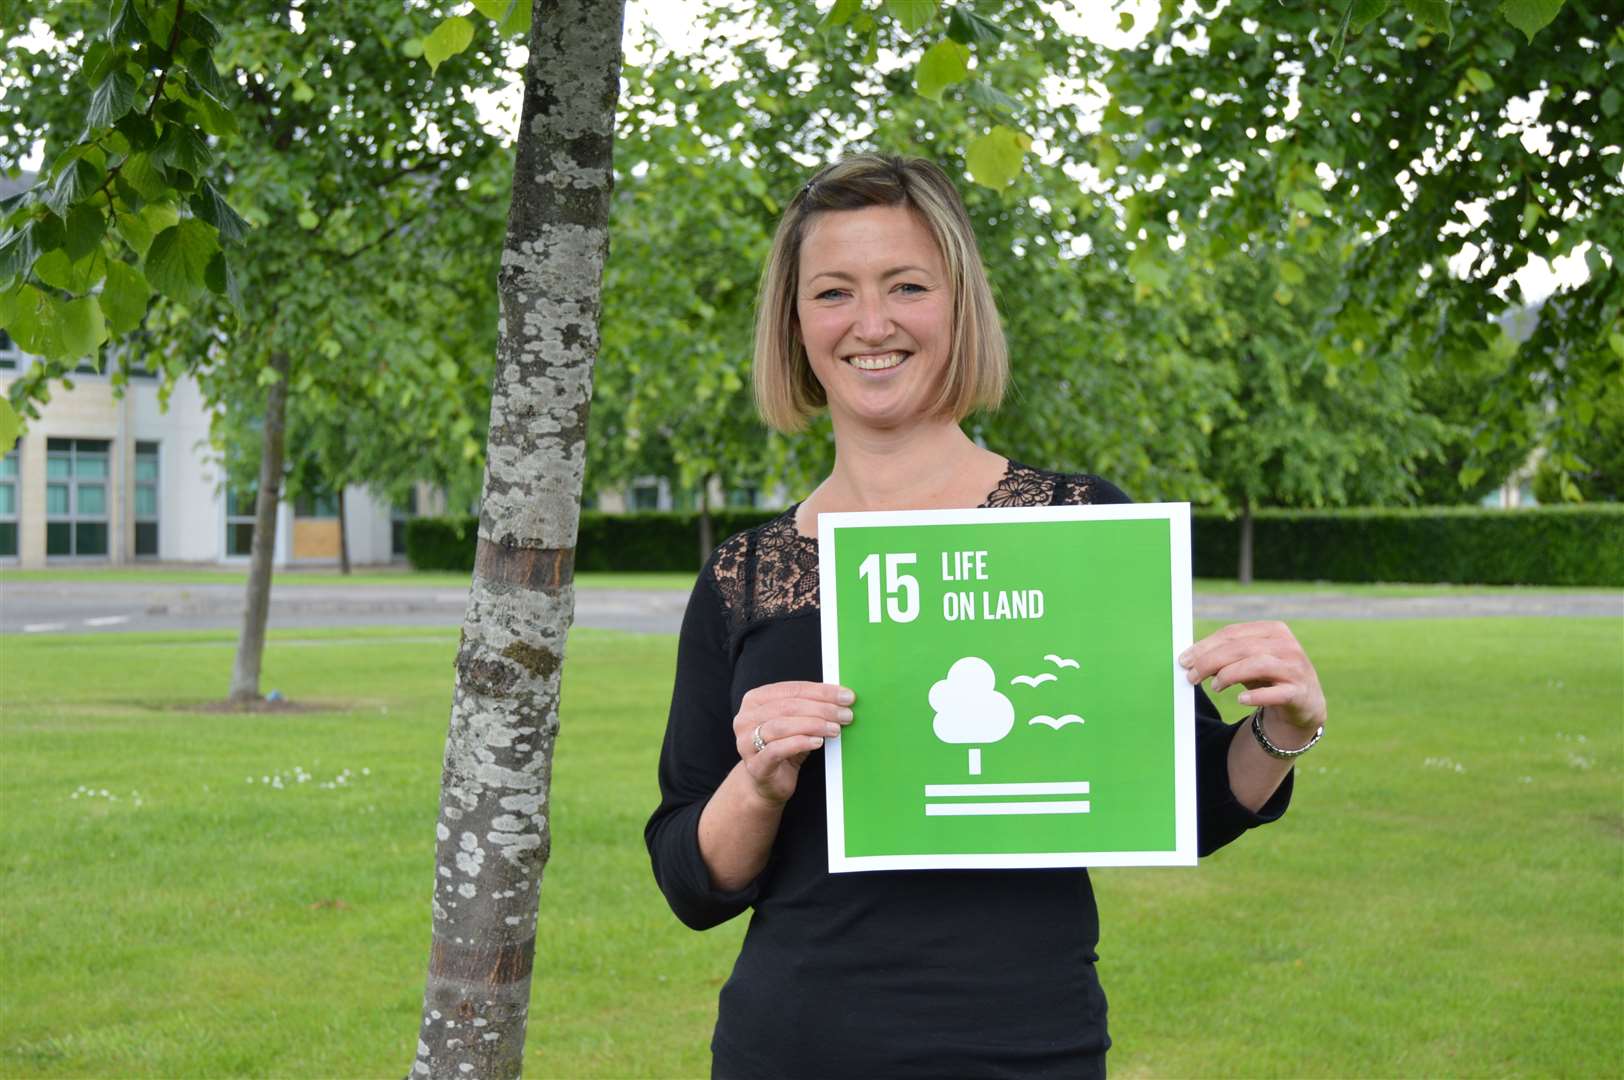 Deputy CEO of Keep Scotland Beautiful Catherine Gee, pictured here with the icon for UN Sustainable Development Goal 15 (Life on Land).